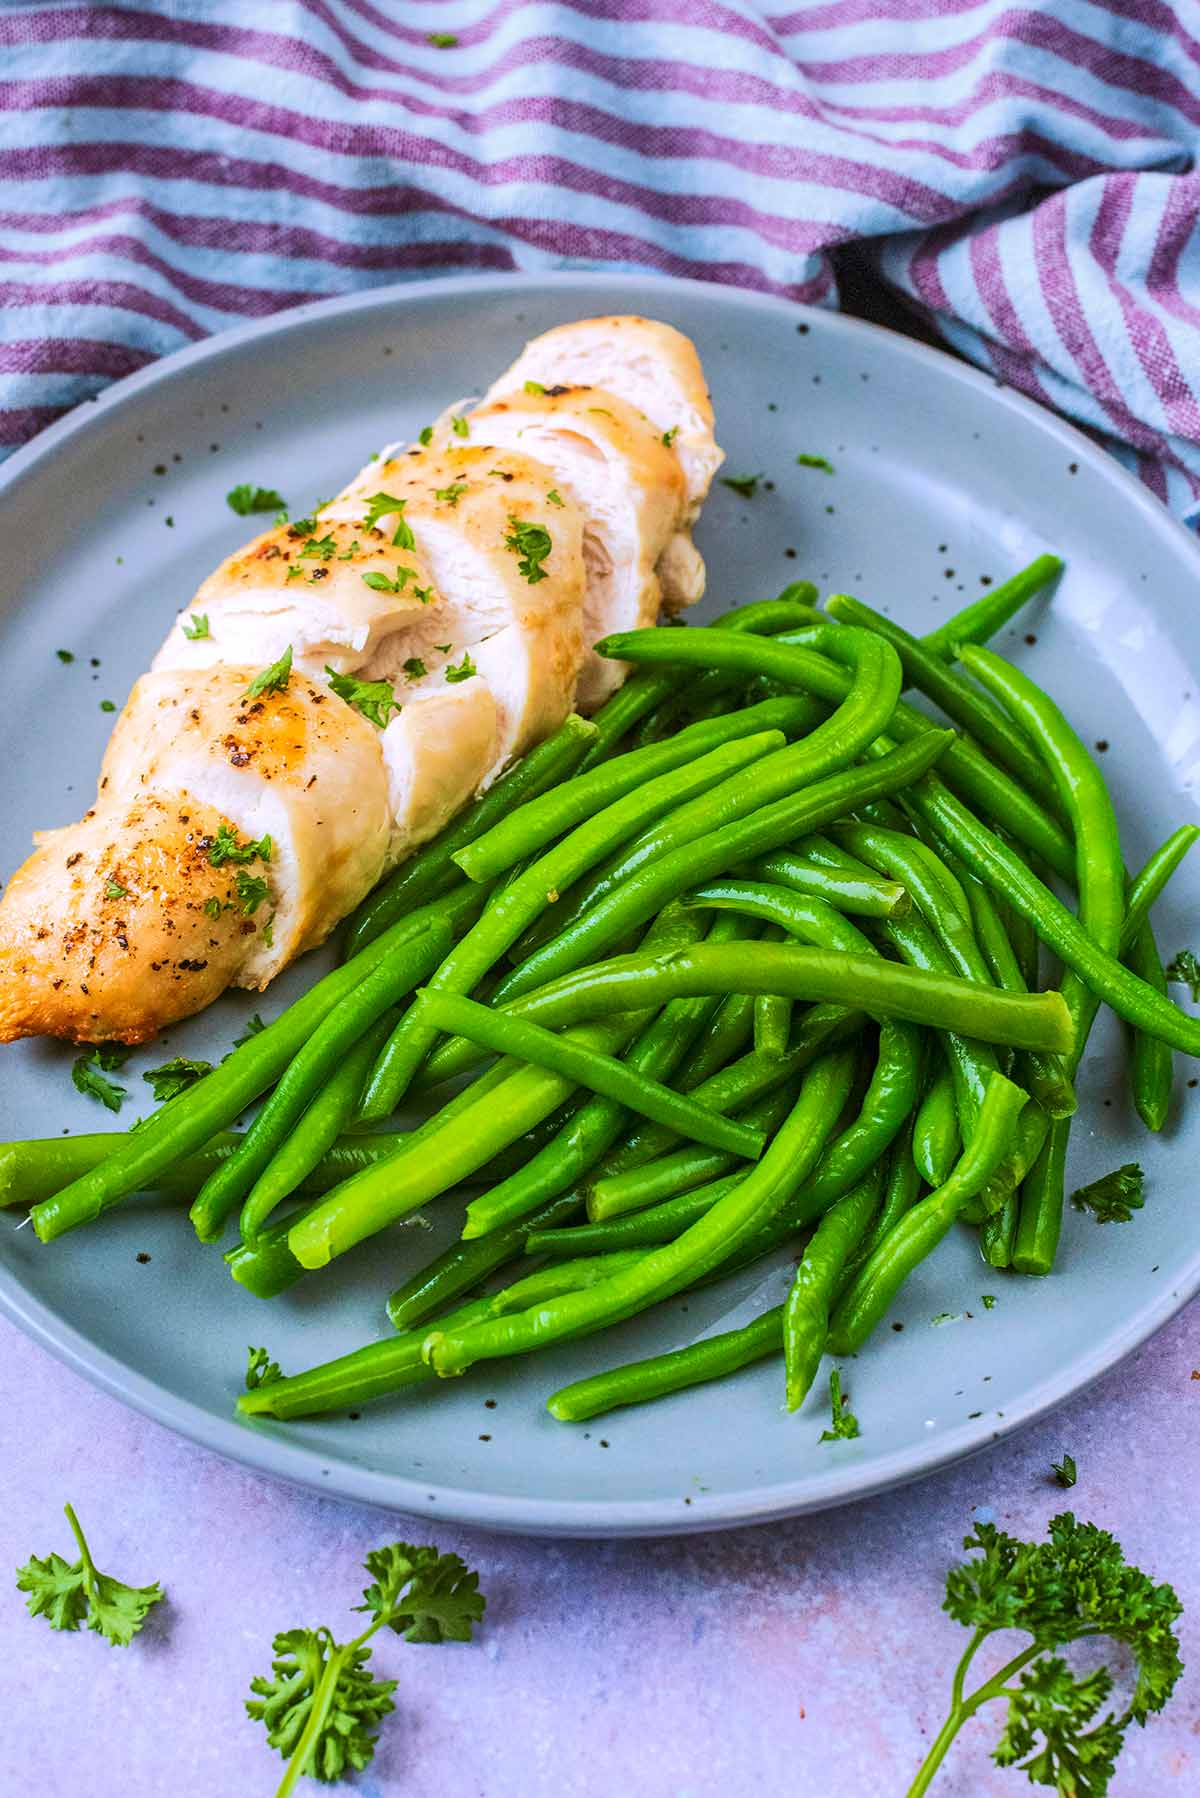 A plate of sliced chicken breast and green beans.